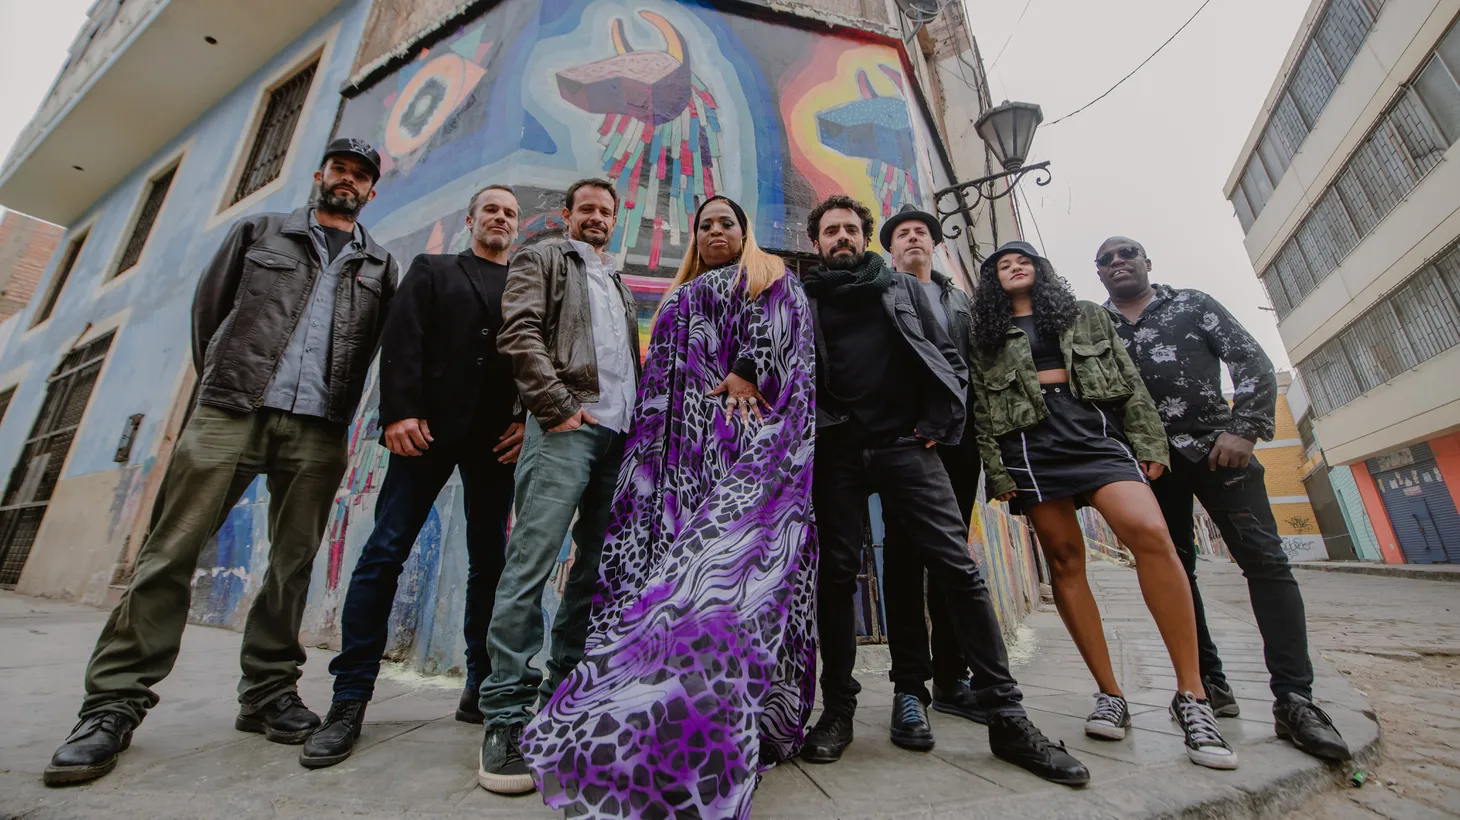 Afro-Peruvian soundsystem Novalima celebrate their 20th anniversary with a tour that kicks off in Los Angeles this Thursday, and they have released a brand new track that will get your hips swaying and feet dancing.